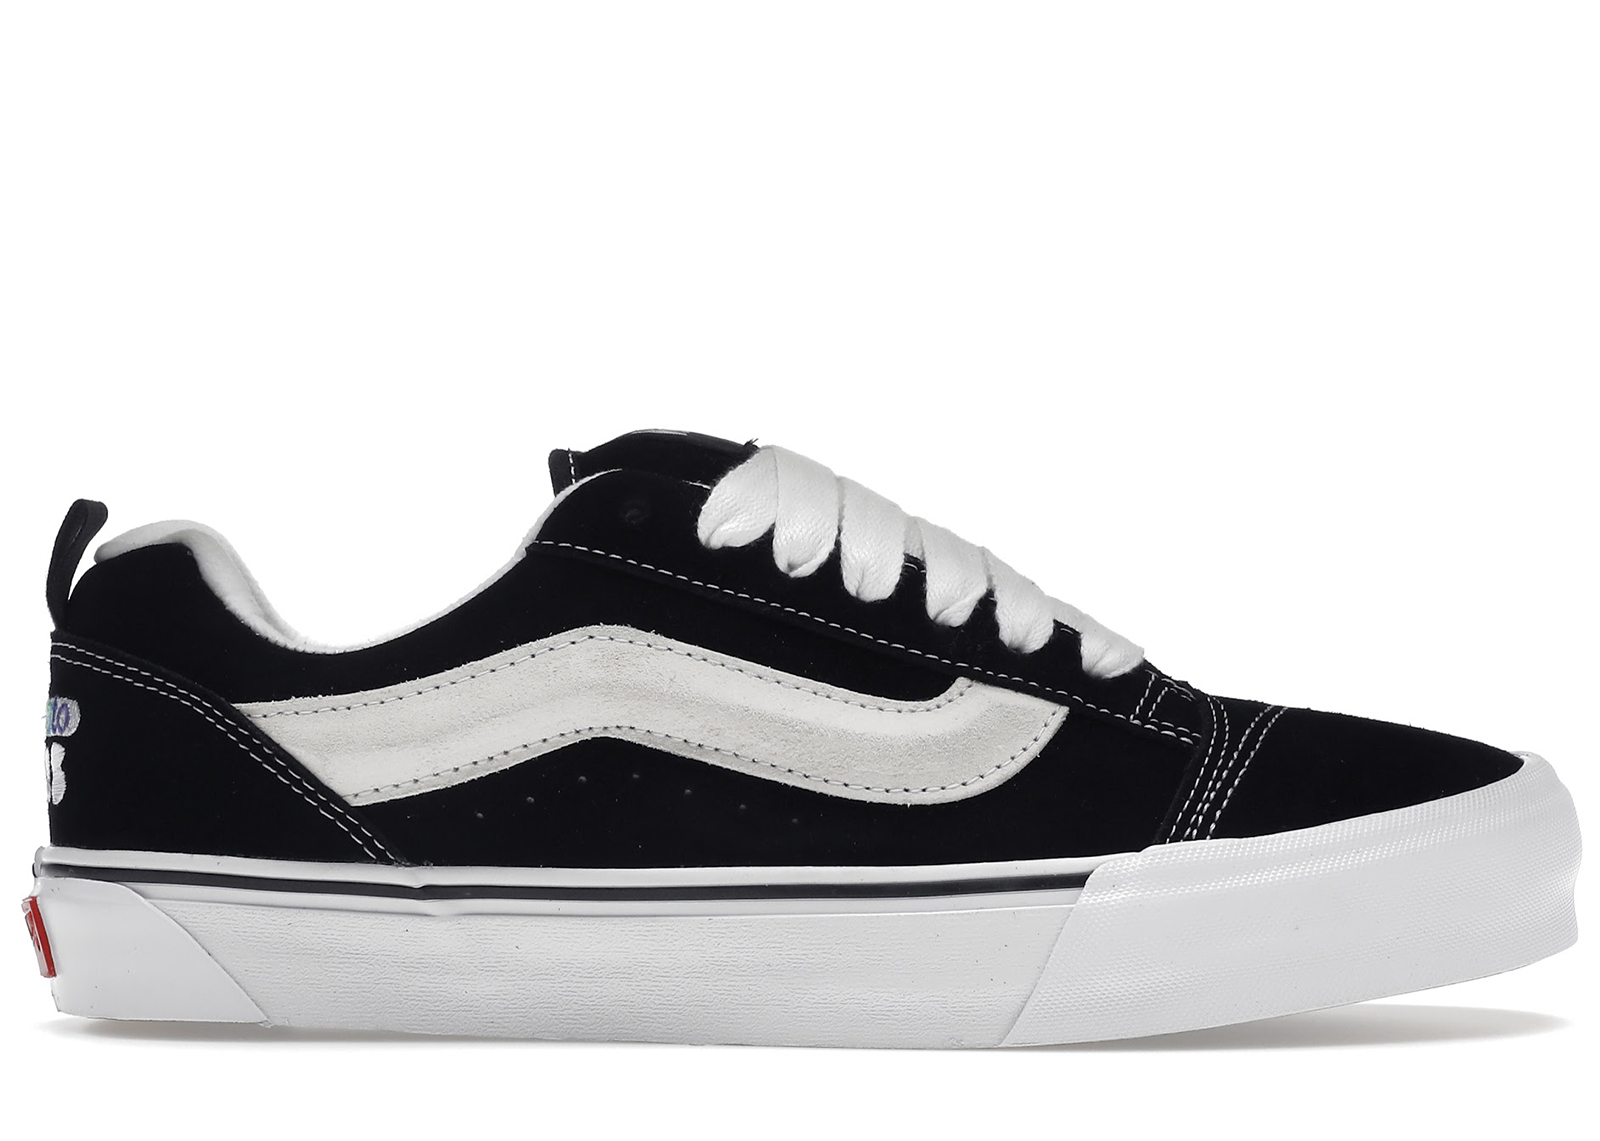 Buy Vans Shoes, Slip-Ons and High Tops - StockX